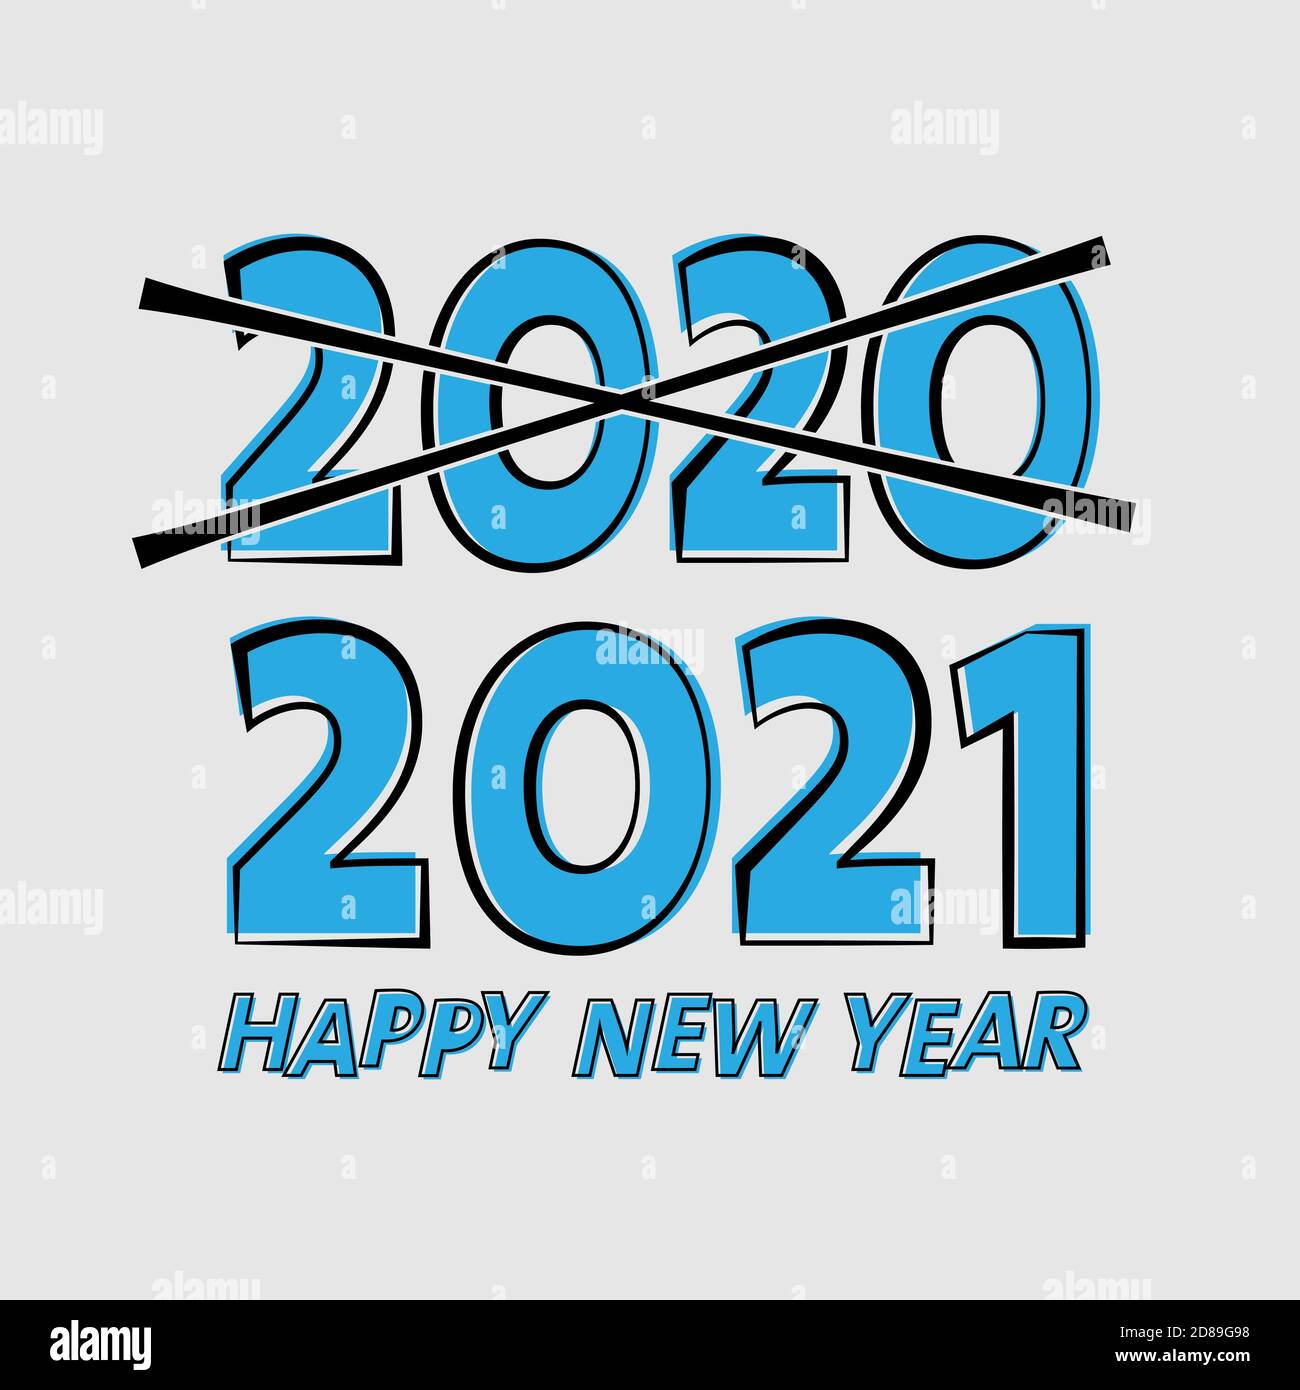 HAPPY NEW YEAR 2021 greeting card or sticker vector illustration Stock Vector